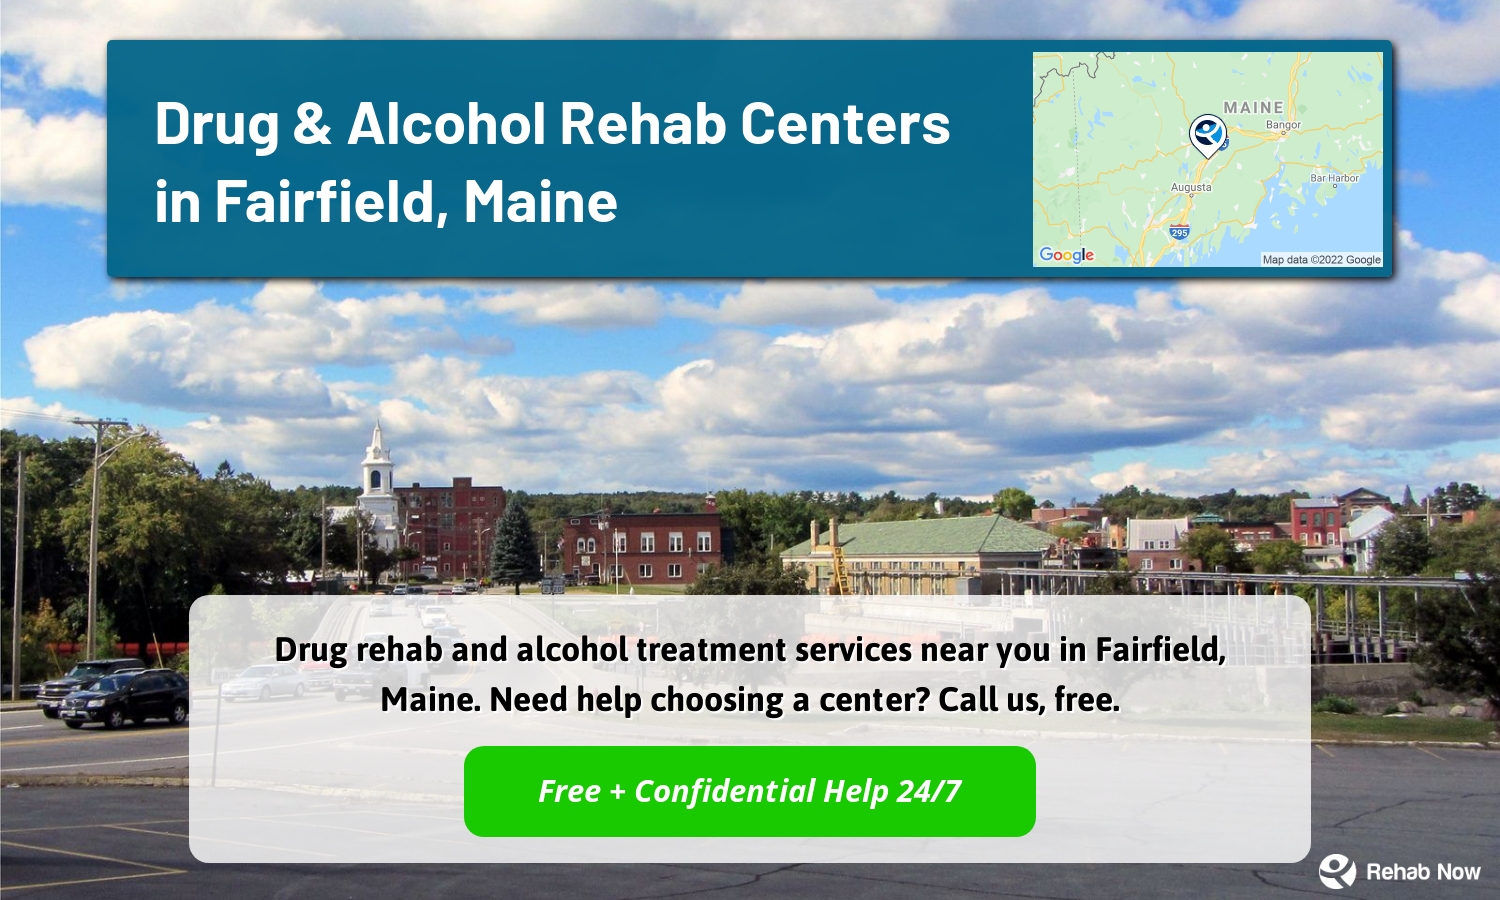 Drug rehab and alcohol treatment services near you in Fairfield, Maine. Need help choosing a center? Call us, free.